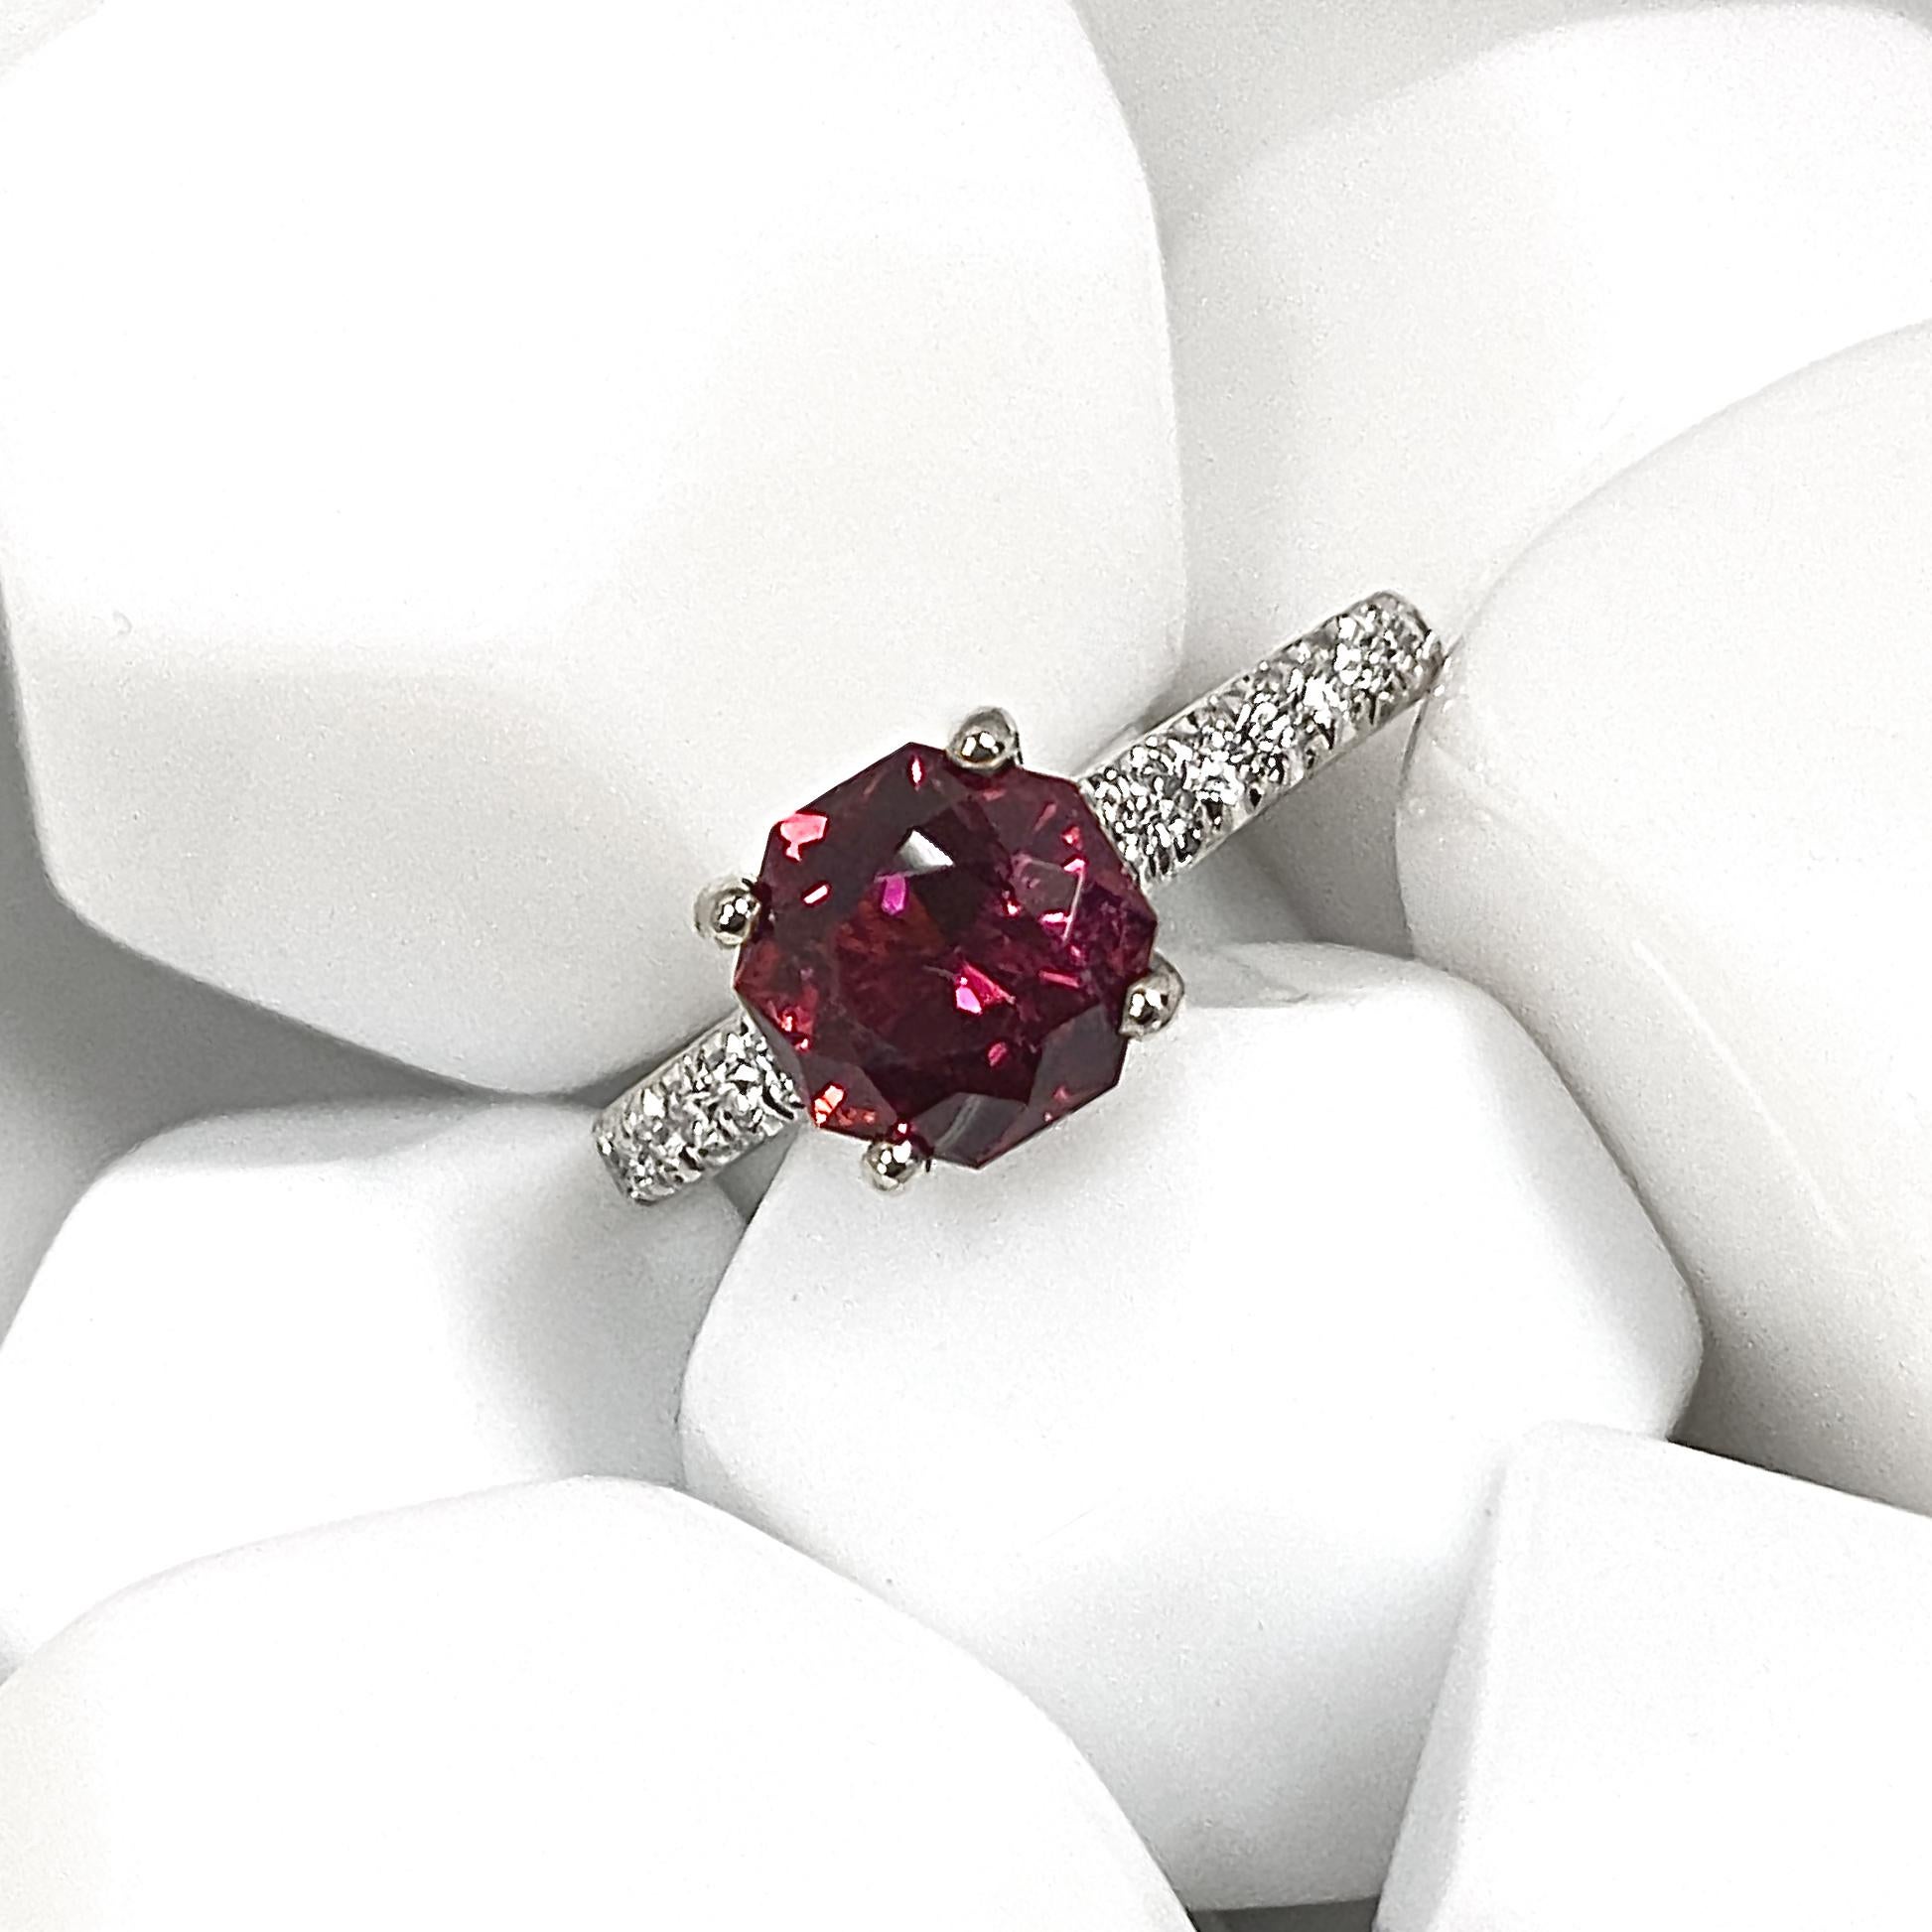 Contemporary 1.7 Carat Dark Pink Tourmaline Octagon in White Gold Ring with Diamond Band